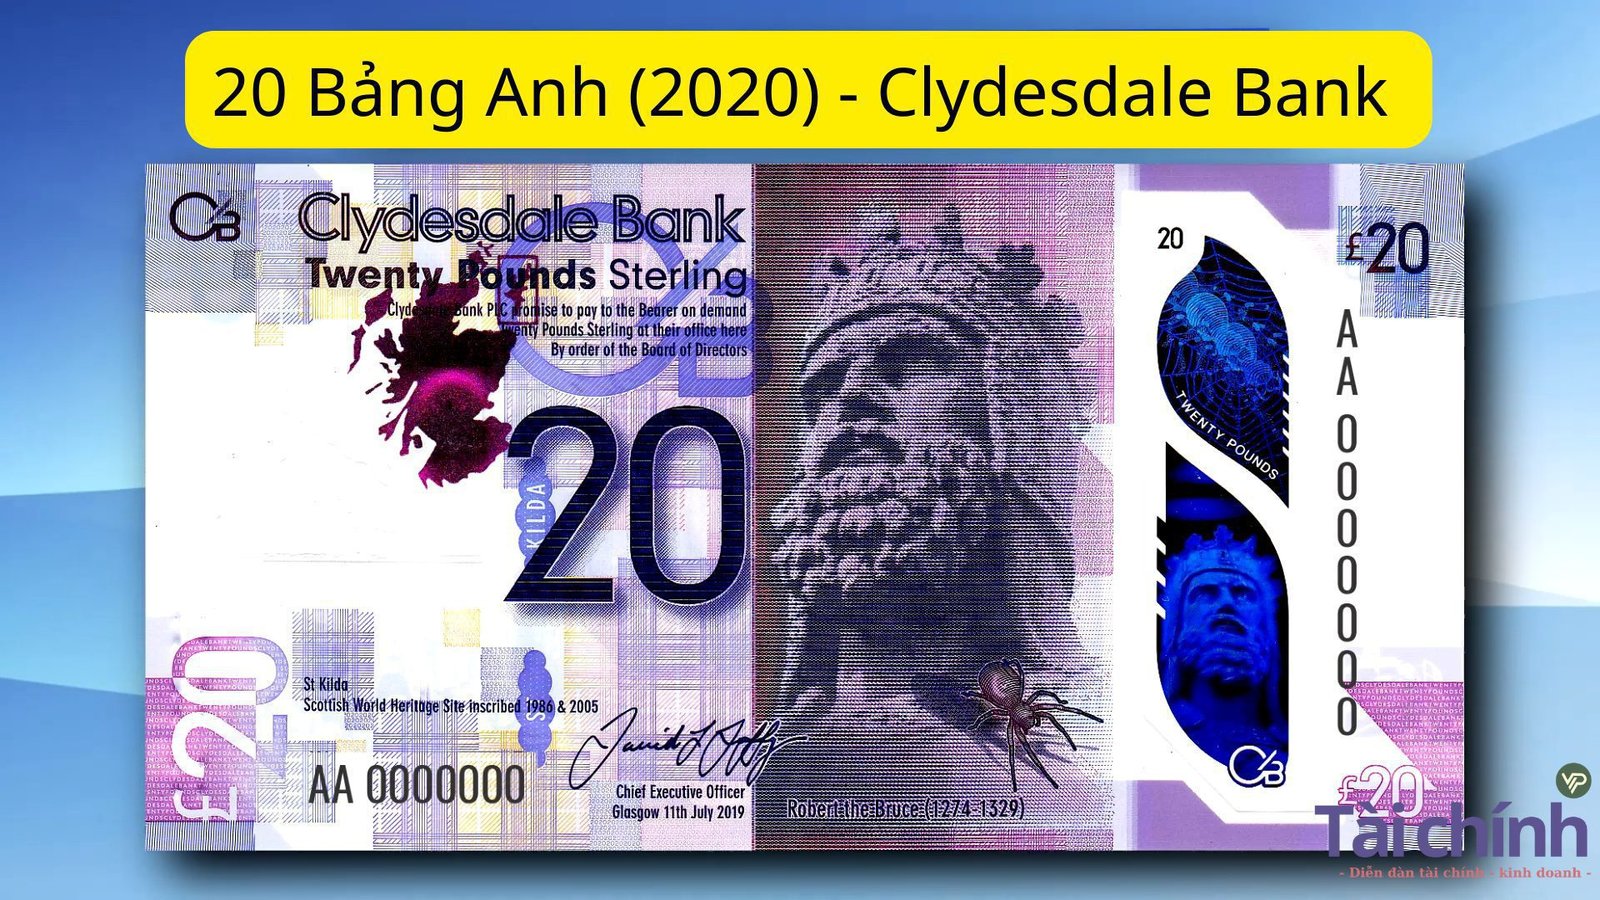 20 Bảng Anh (2020) - Clydesdale Bank